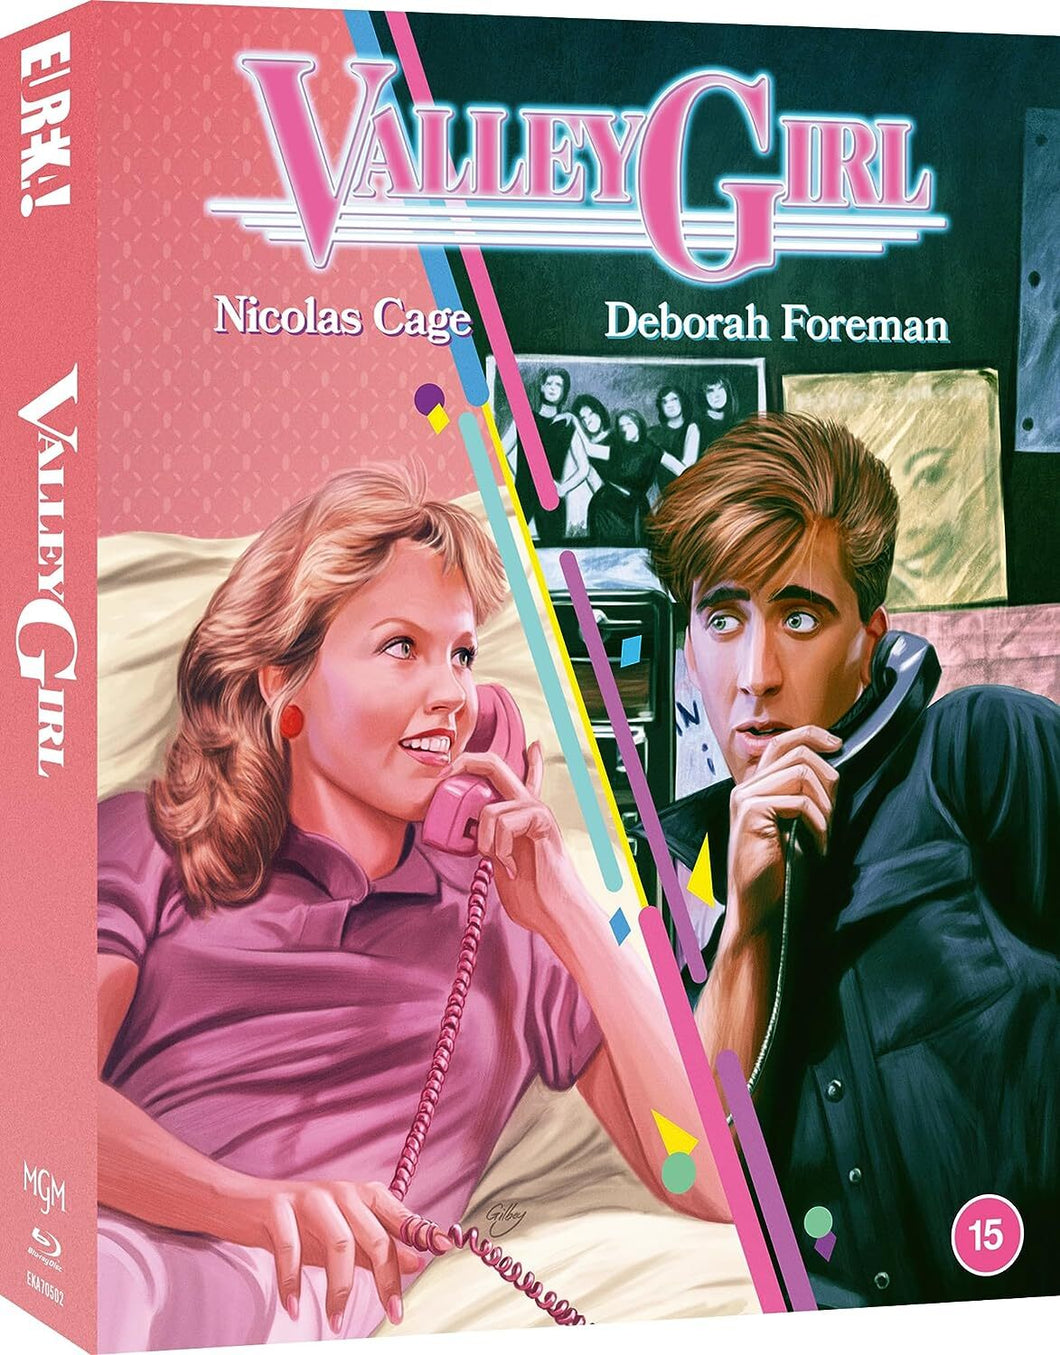 Valley Girl (1983) - front cover